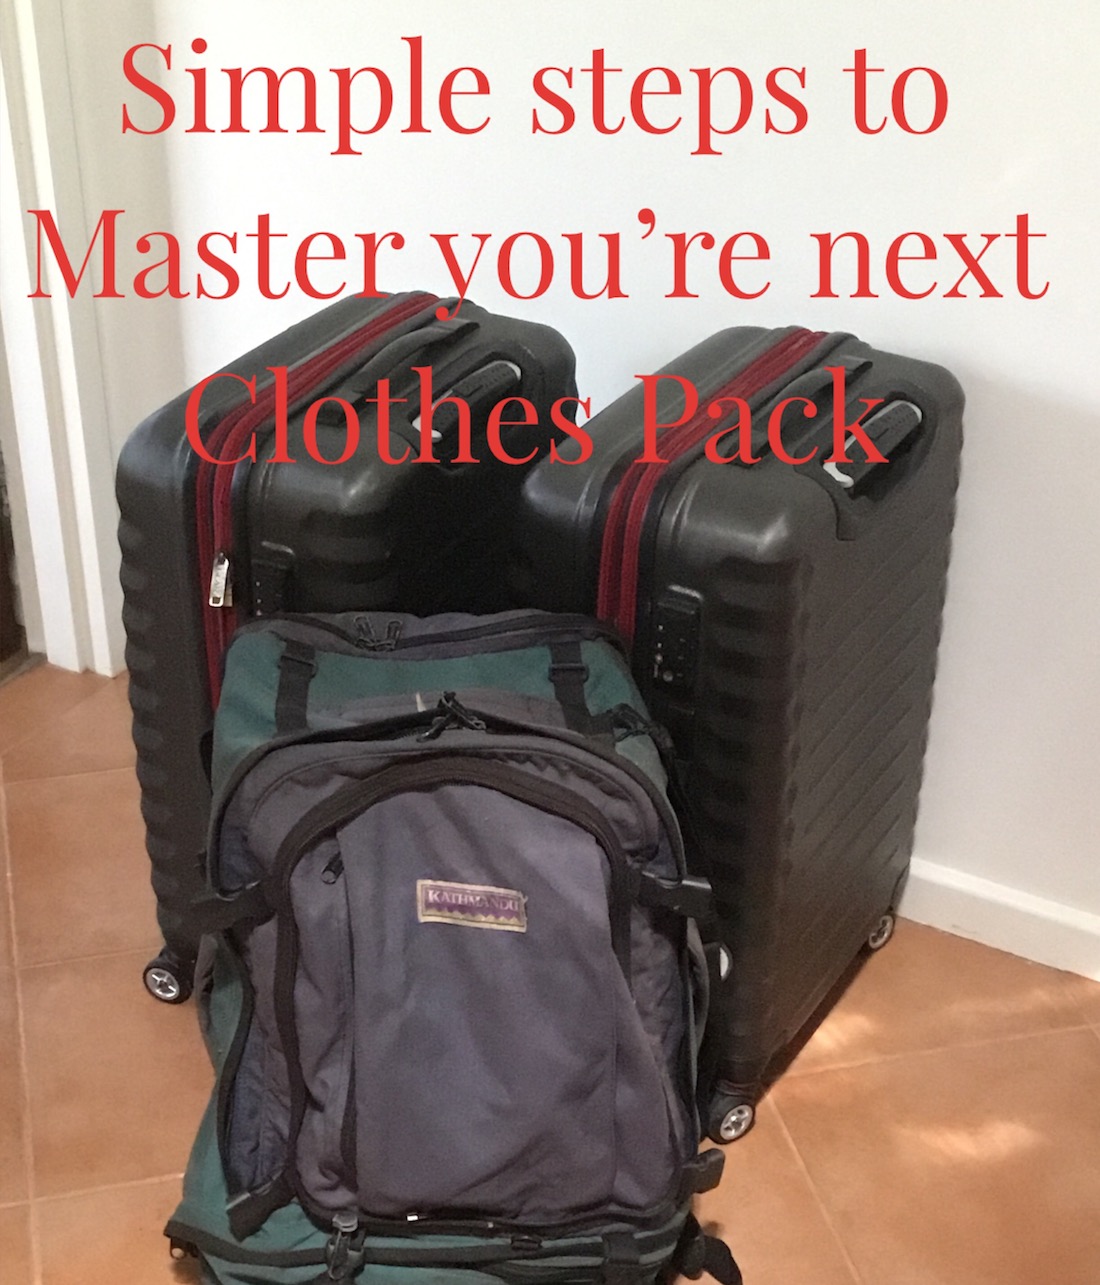 Simple steps to master your next clothes pack